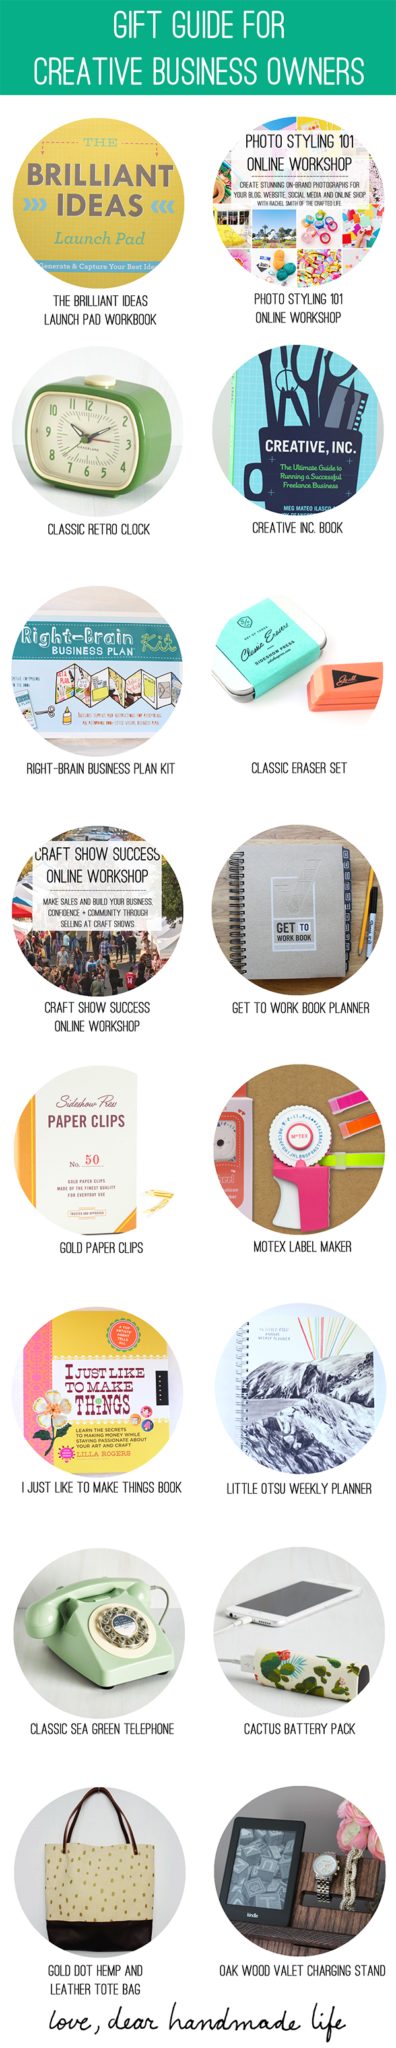 Gift Guide for Creative Business Owners from Dear Handmade Life